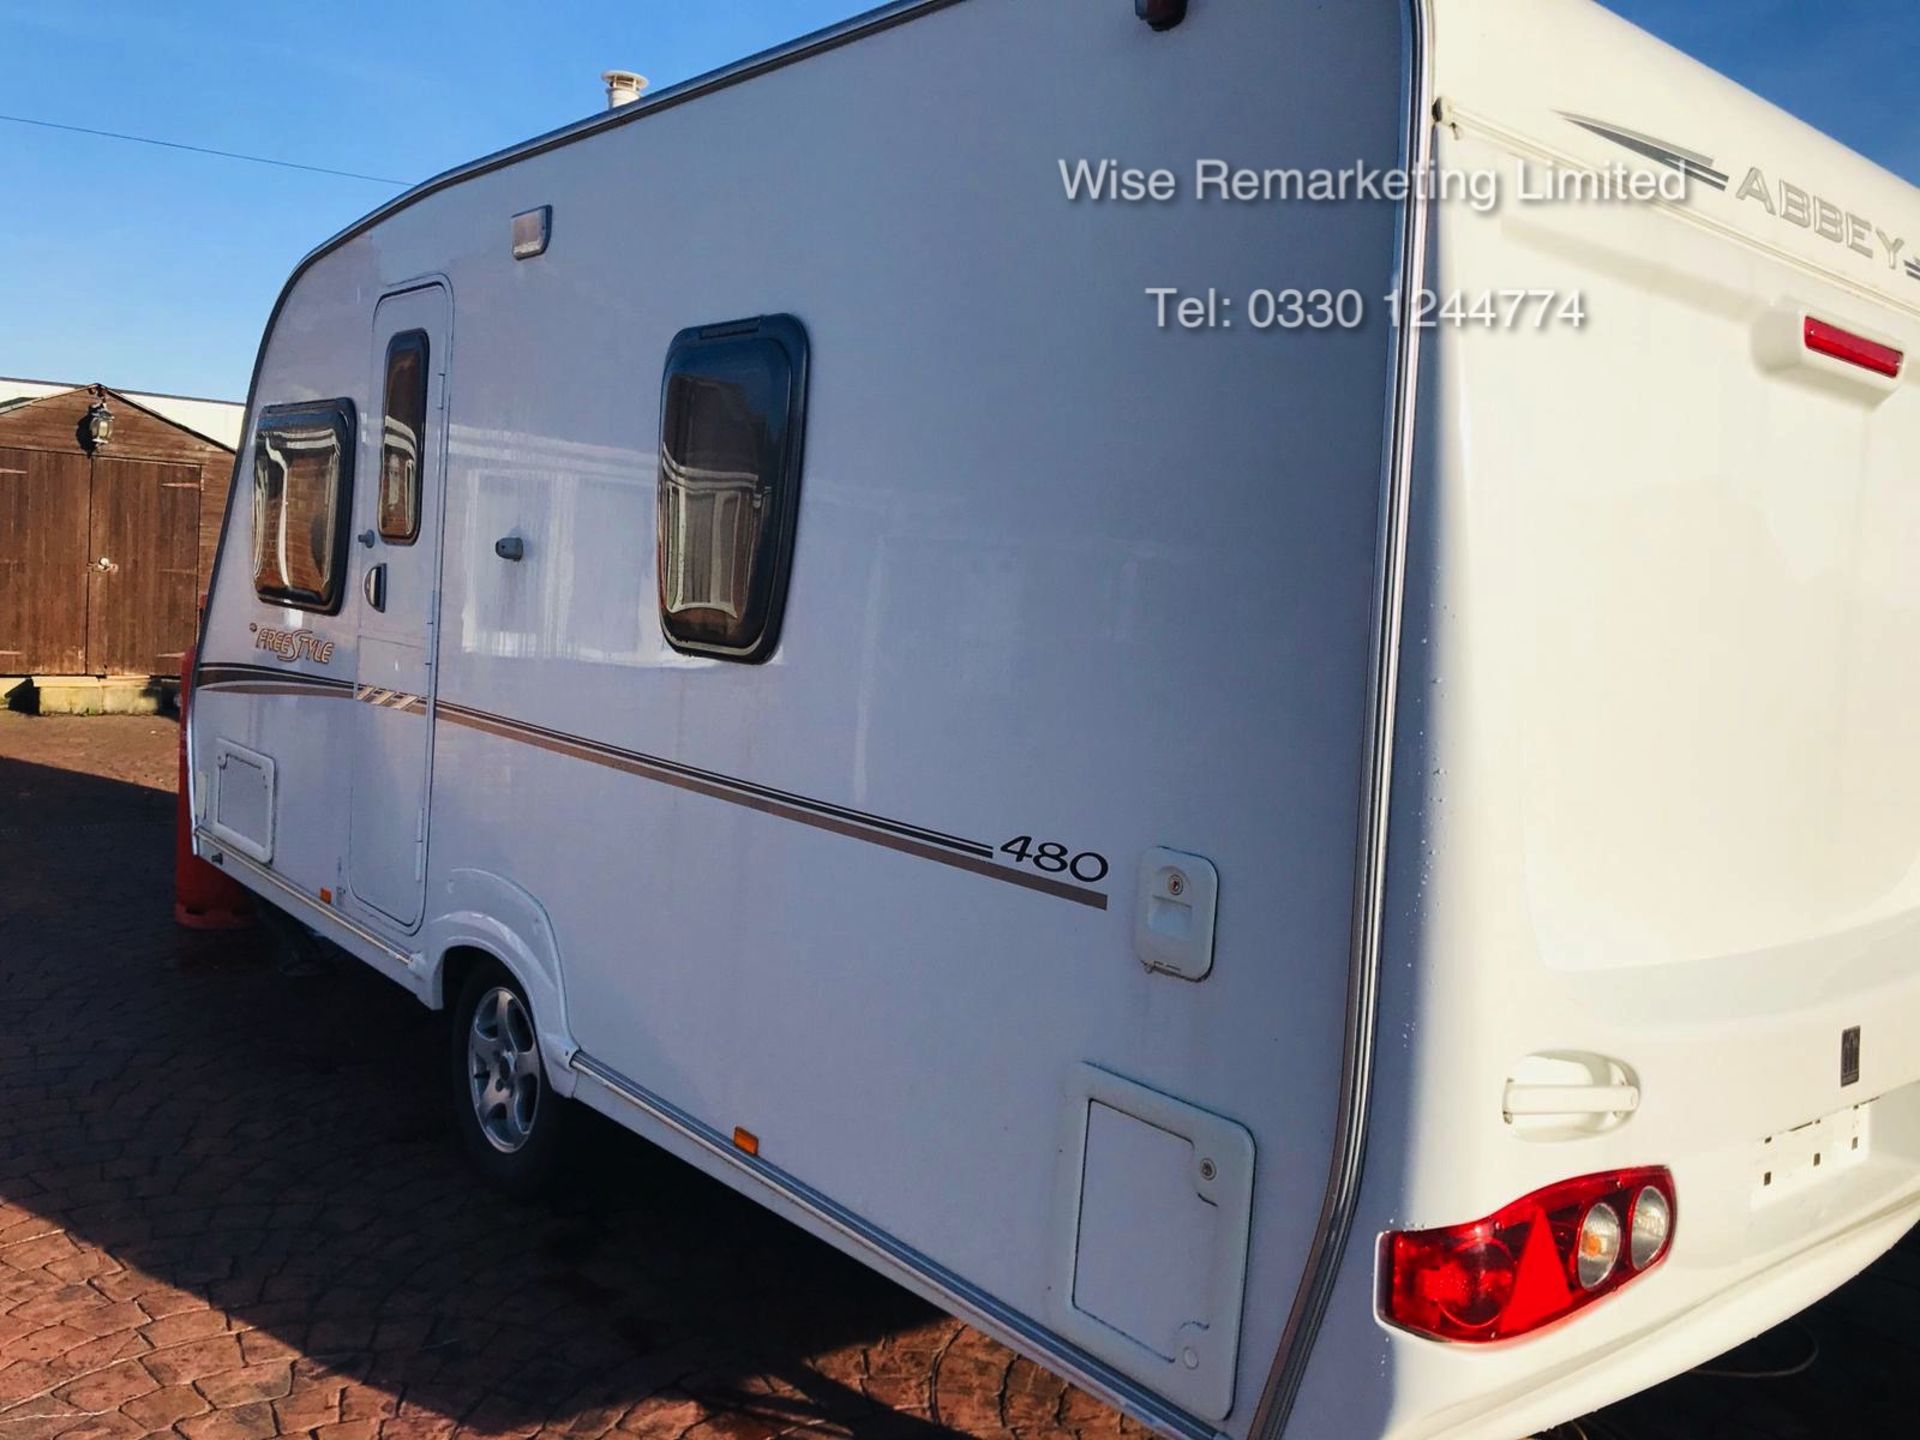 (RESERVE MET) Swift Abbey Freestyle 480 (4 Berth) Caravan - 2008 Model - 1 Former Keeper From New - Image 2 of 32